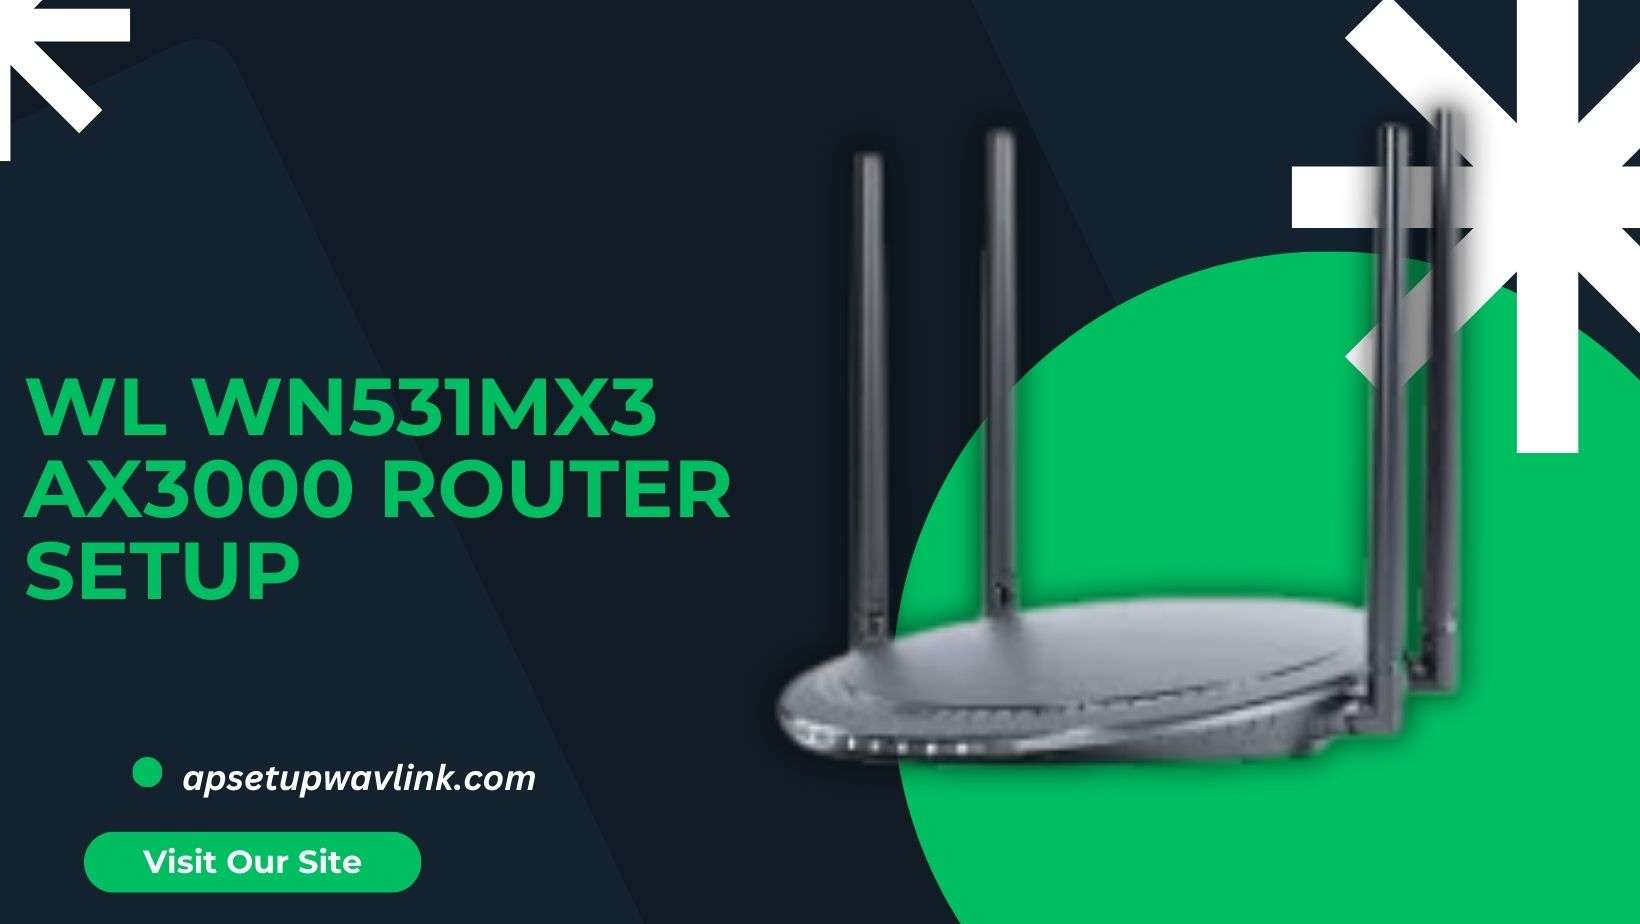 You are currently viewing WL WN531MX3 AX3000 Router Setup